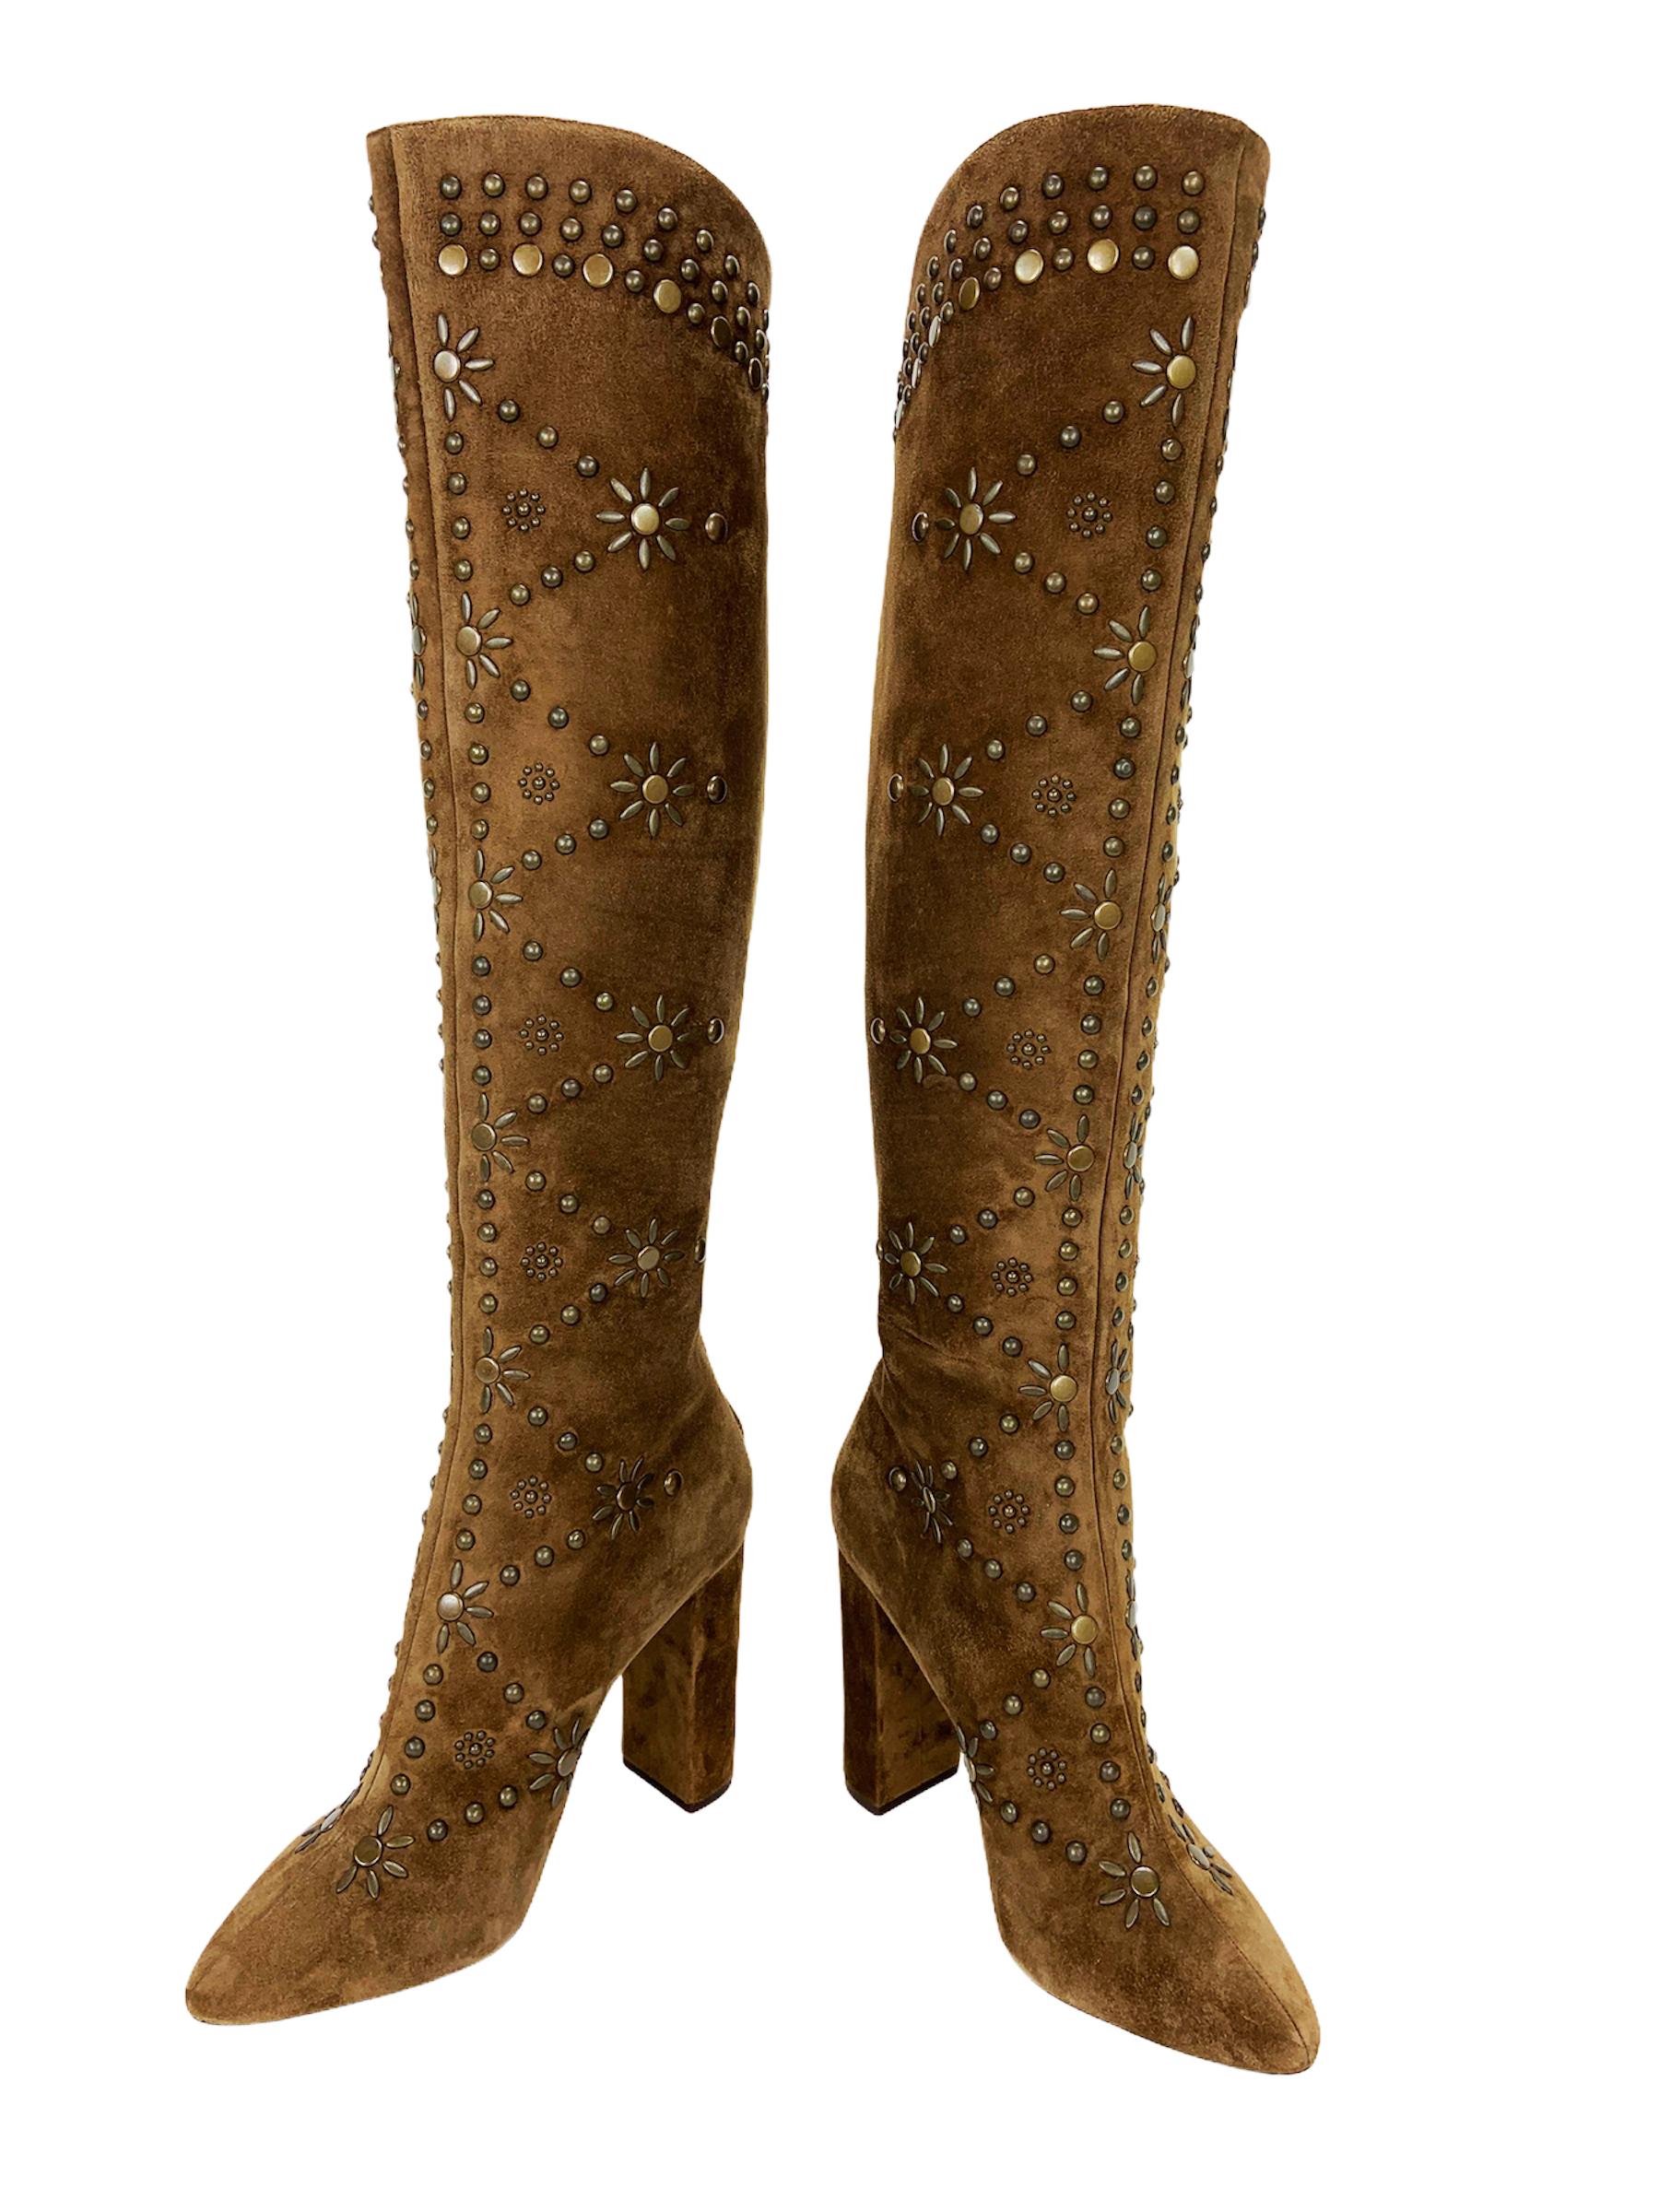 New Saint Laurent *Ella* Studded Brown Boots
Designer size 41 - Saint Laurent shoes run small in 1/2 size.
Brown suede knee boots with flower stud design, Back zip eases dress, Black leather lining, 4 1/8